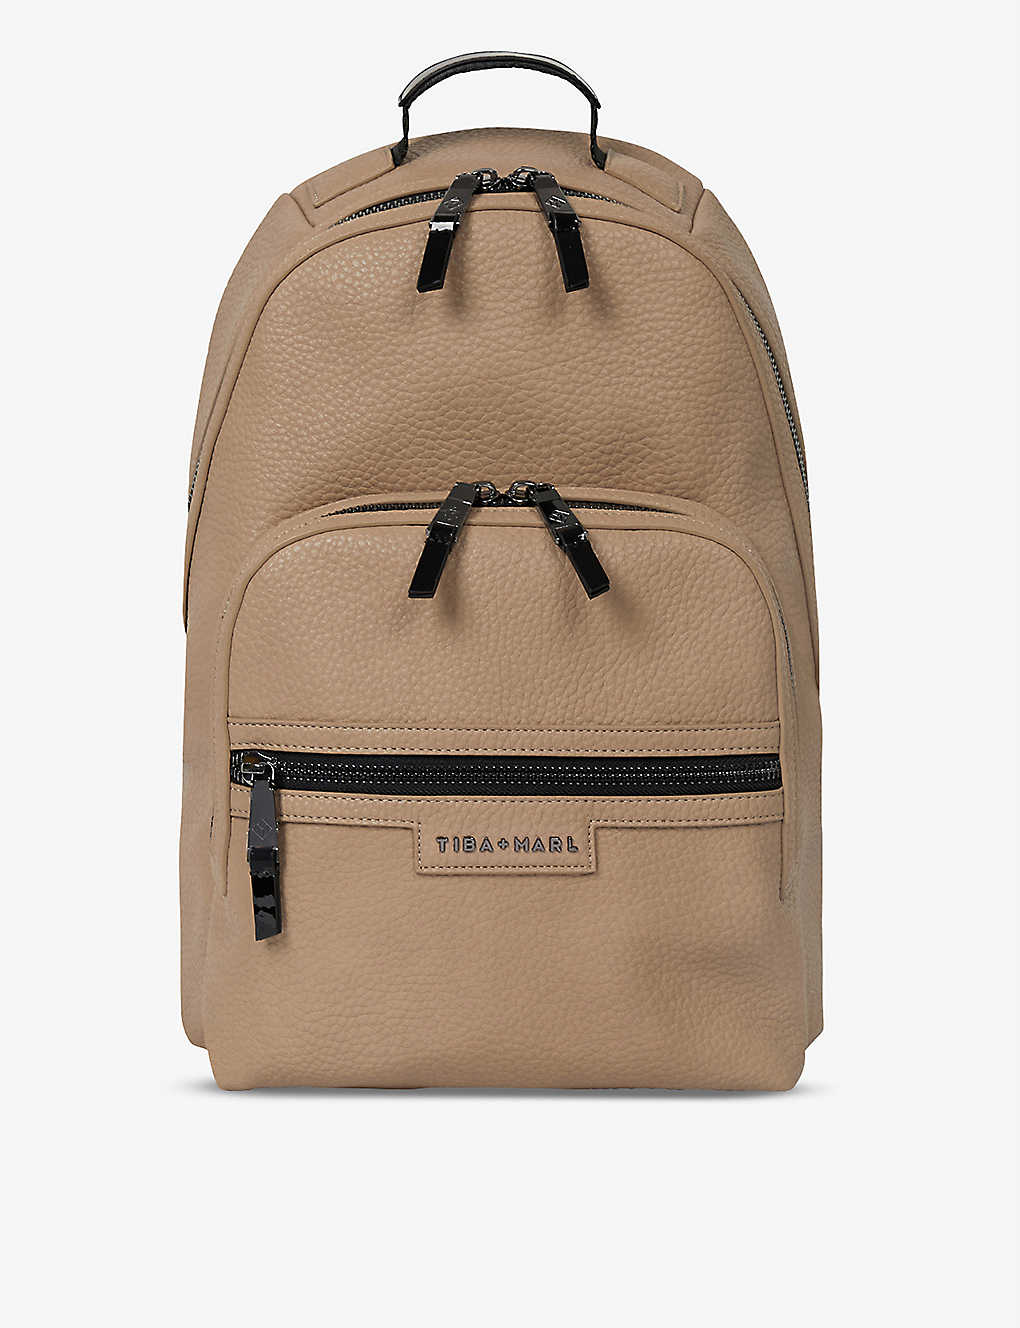 Tiba + Marl Elwood Changing Woven Backpack In Multi